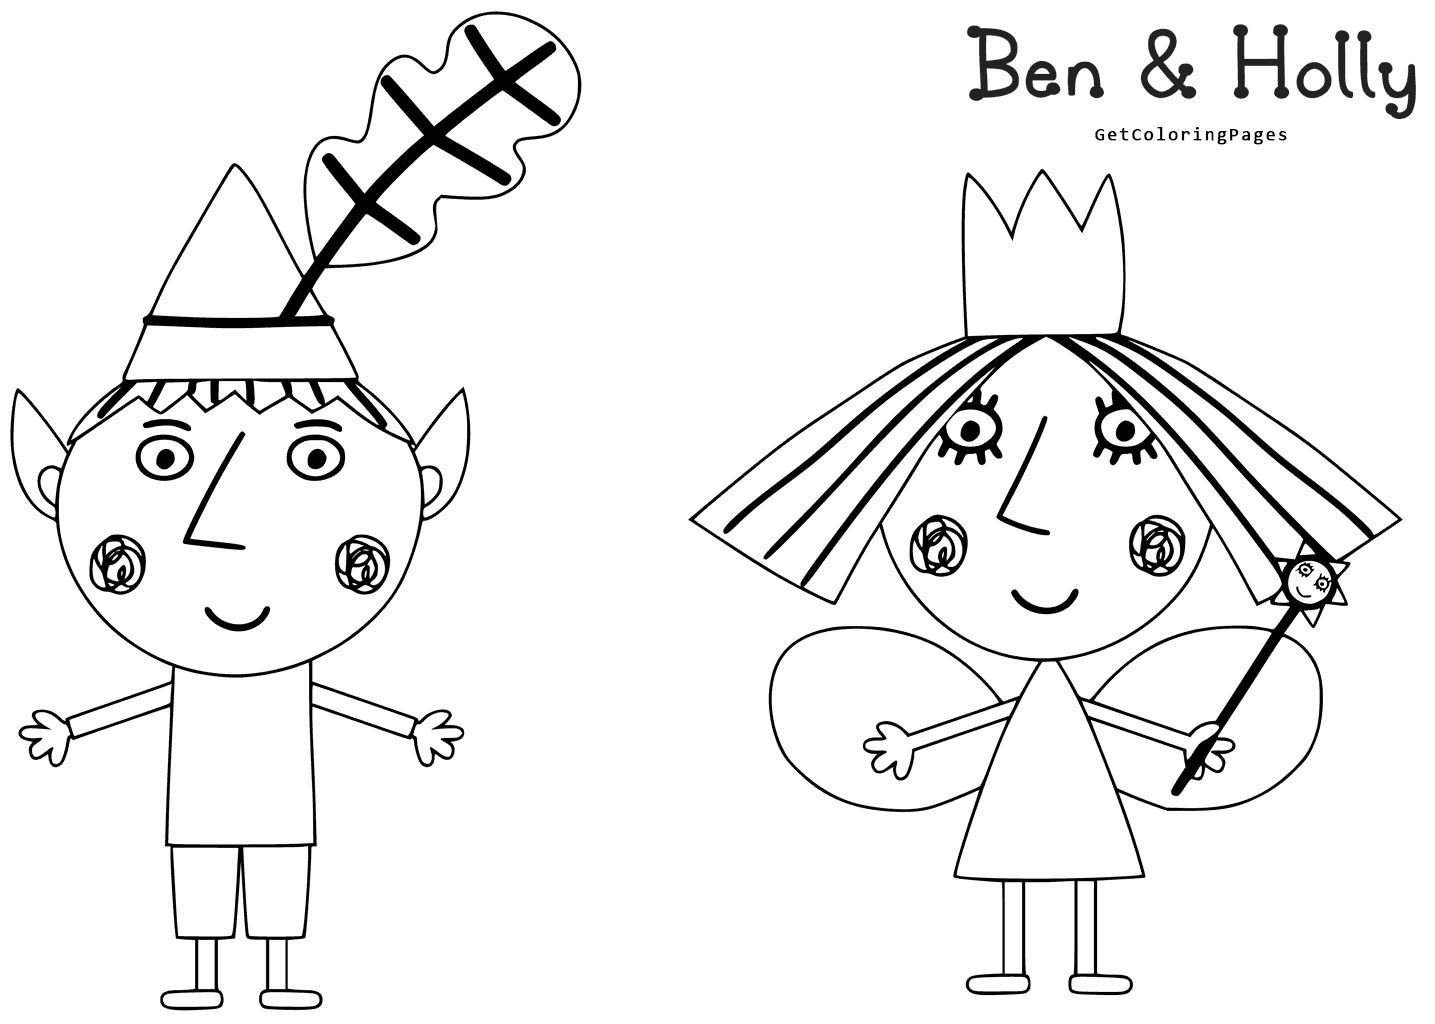 drawing-ben-and-holly-coloring-page